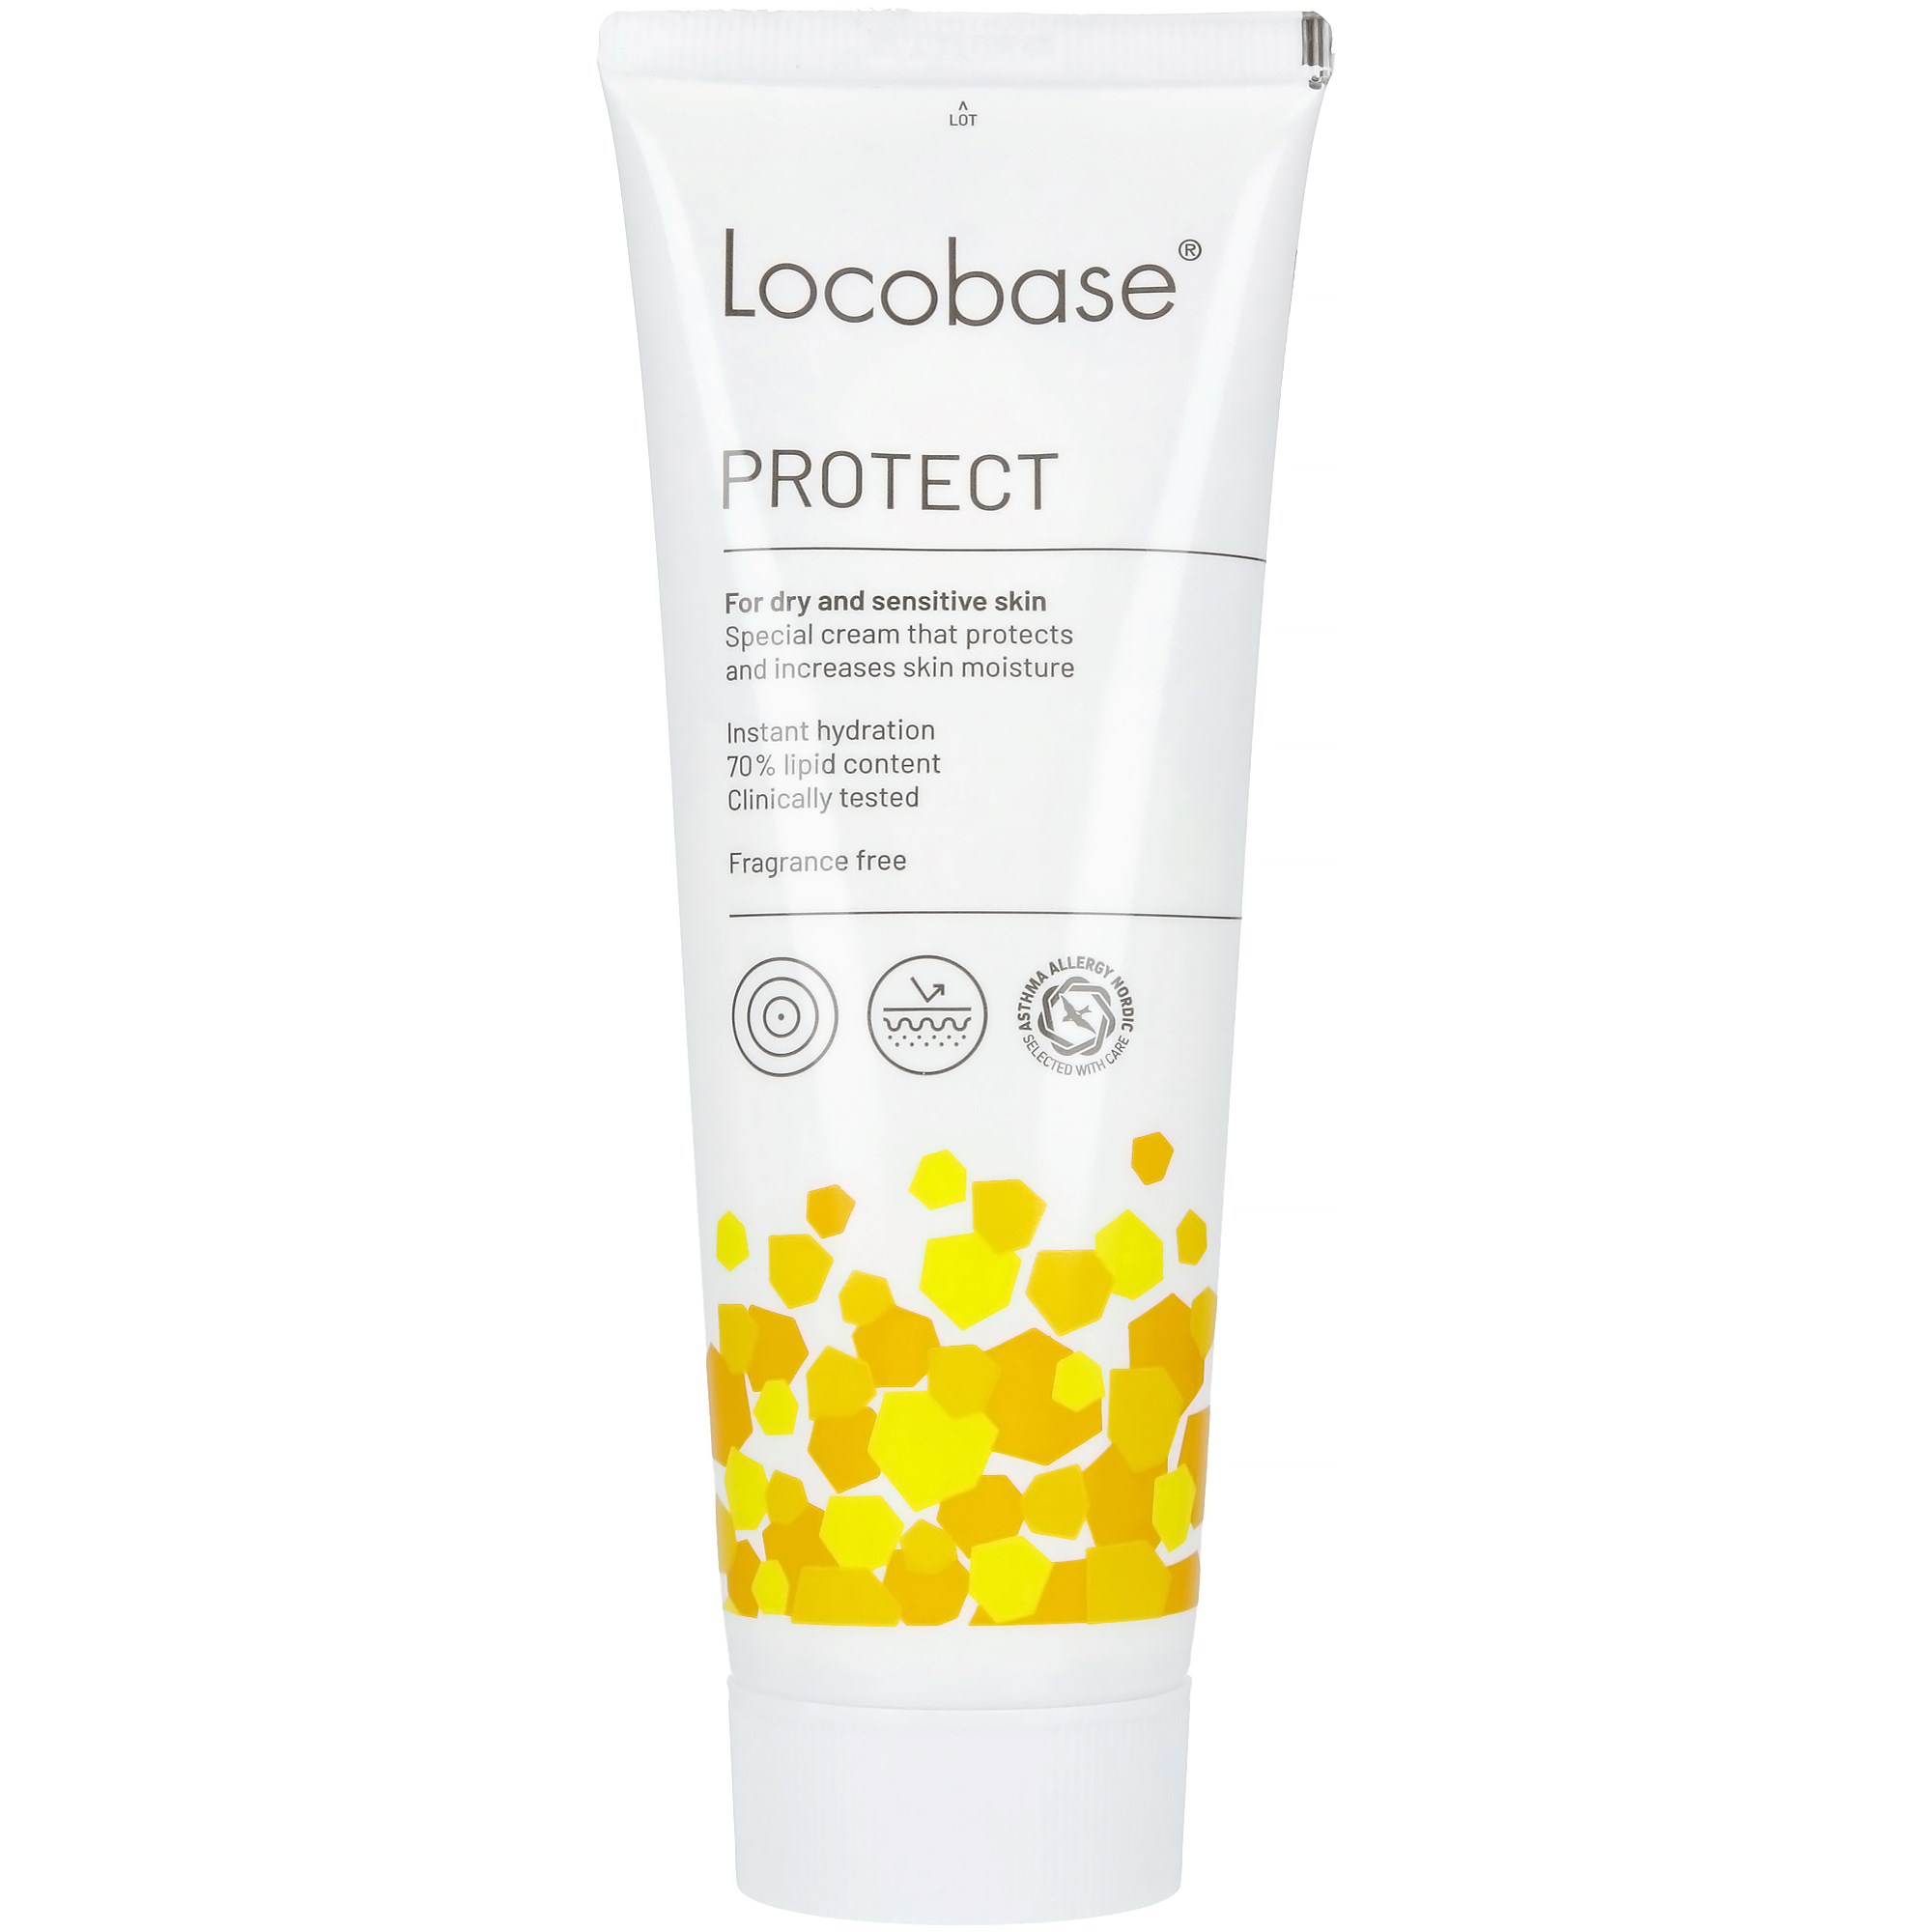 Locobase Protect 100 g